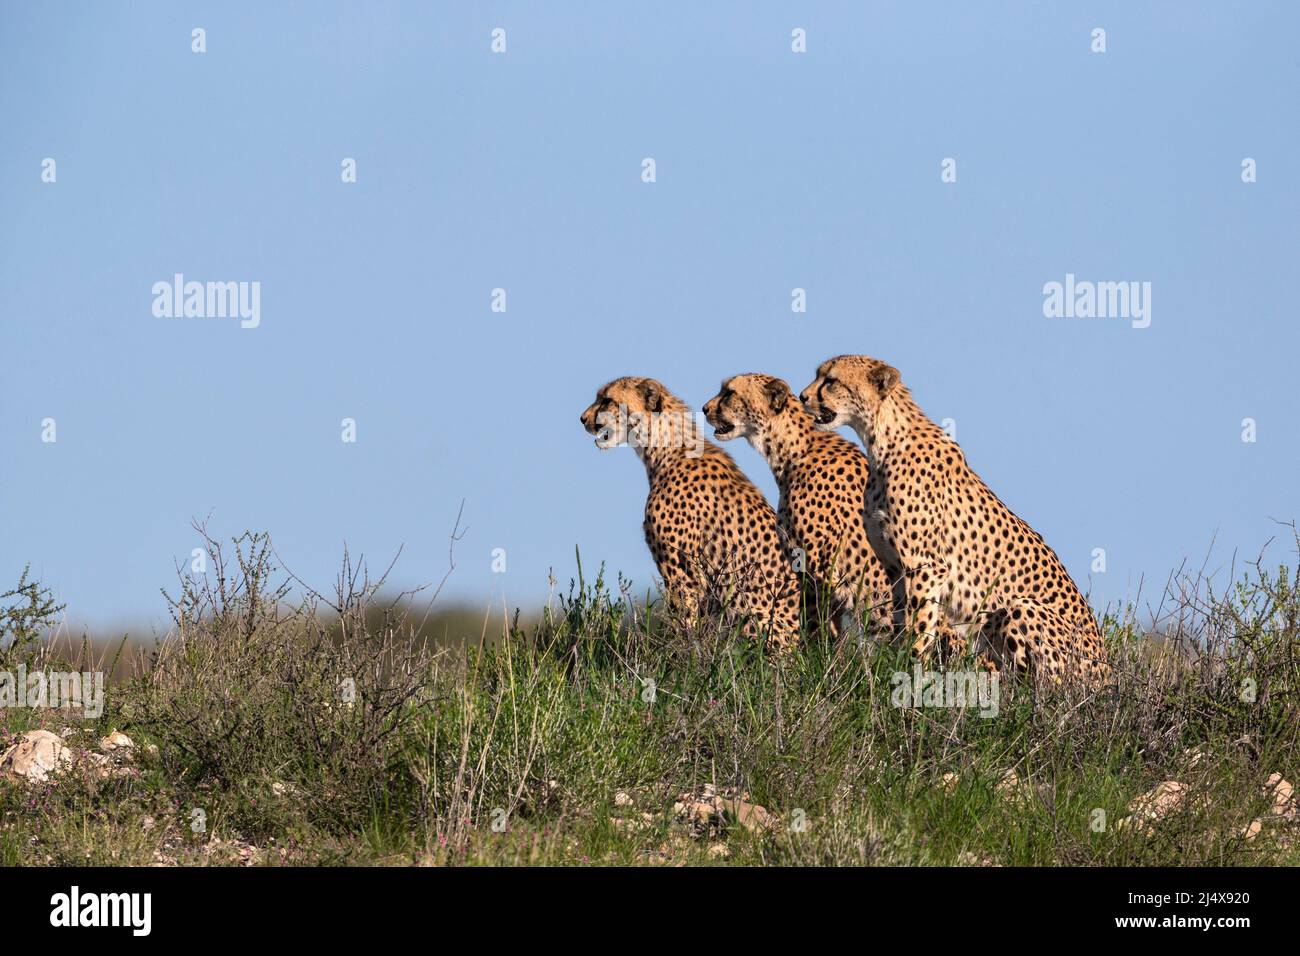 Cheetah (Acinonyx jubatus) mother with young, Kgalagadi transfrontier park, Northern Cape, South Africa, February 2022 Stock Photo